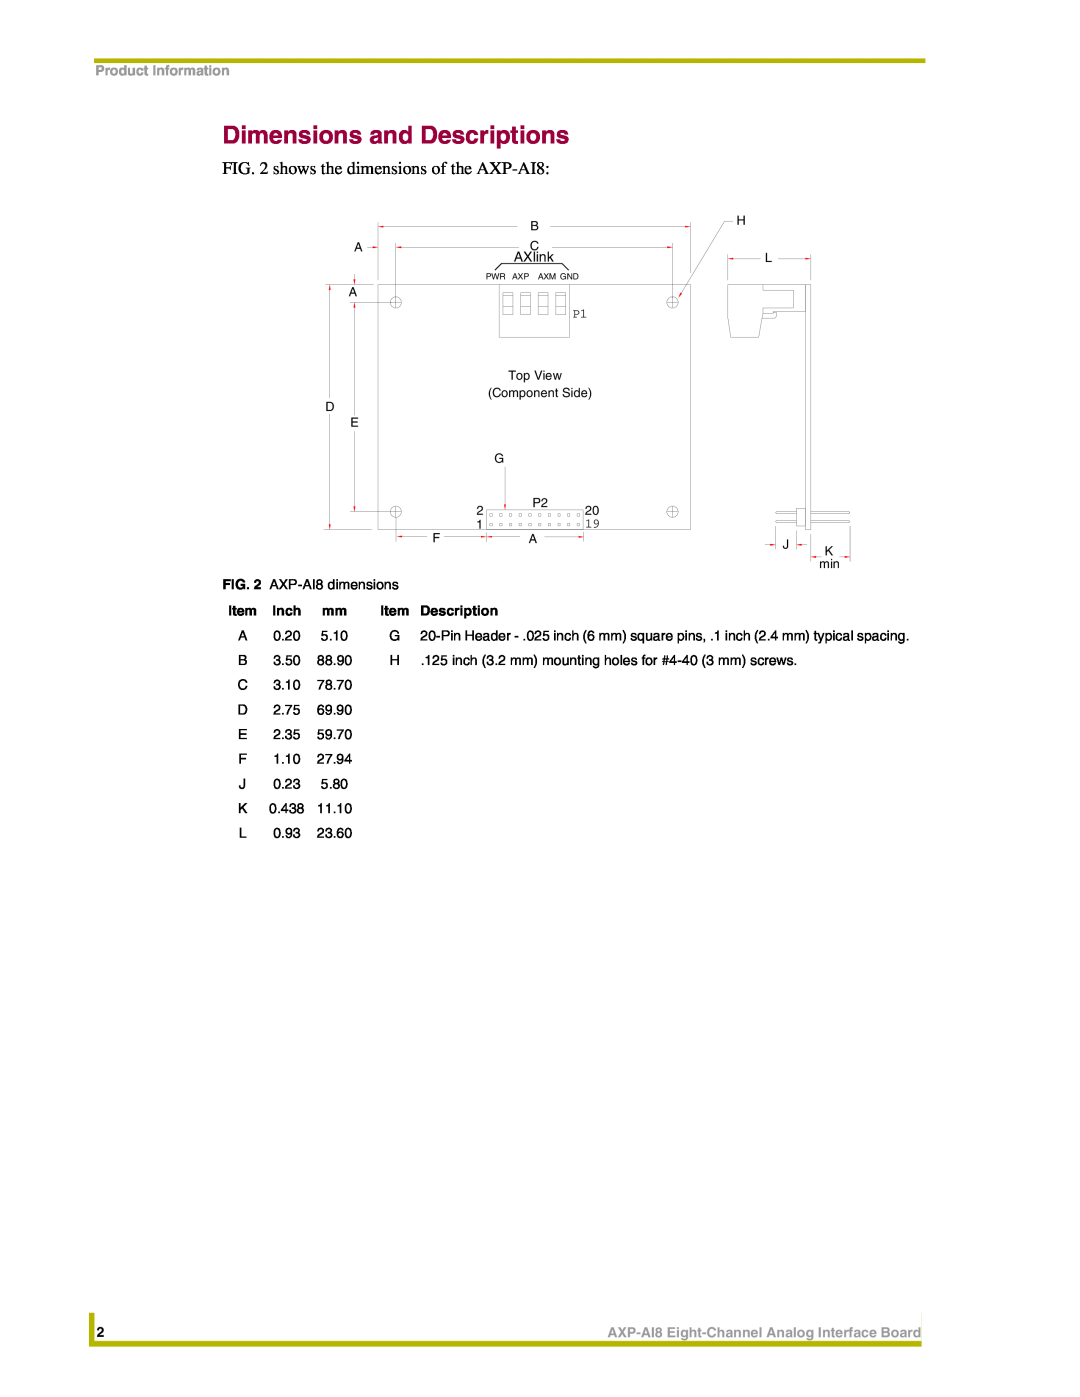 AMX instruction manual Dimensions and Descriptions, shows the dimensions of the AXP-AI8, Product Information, Inch 